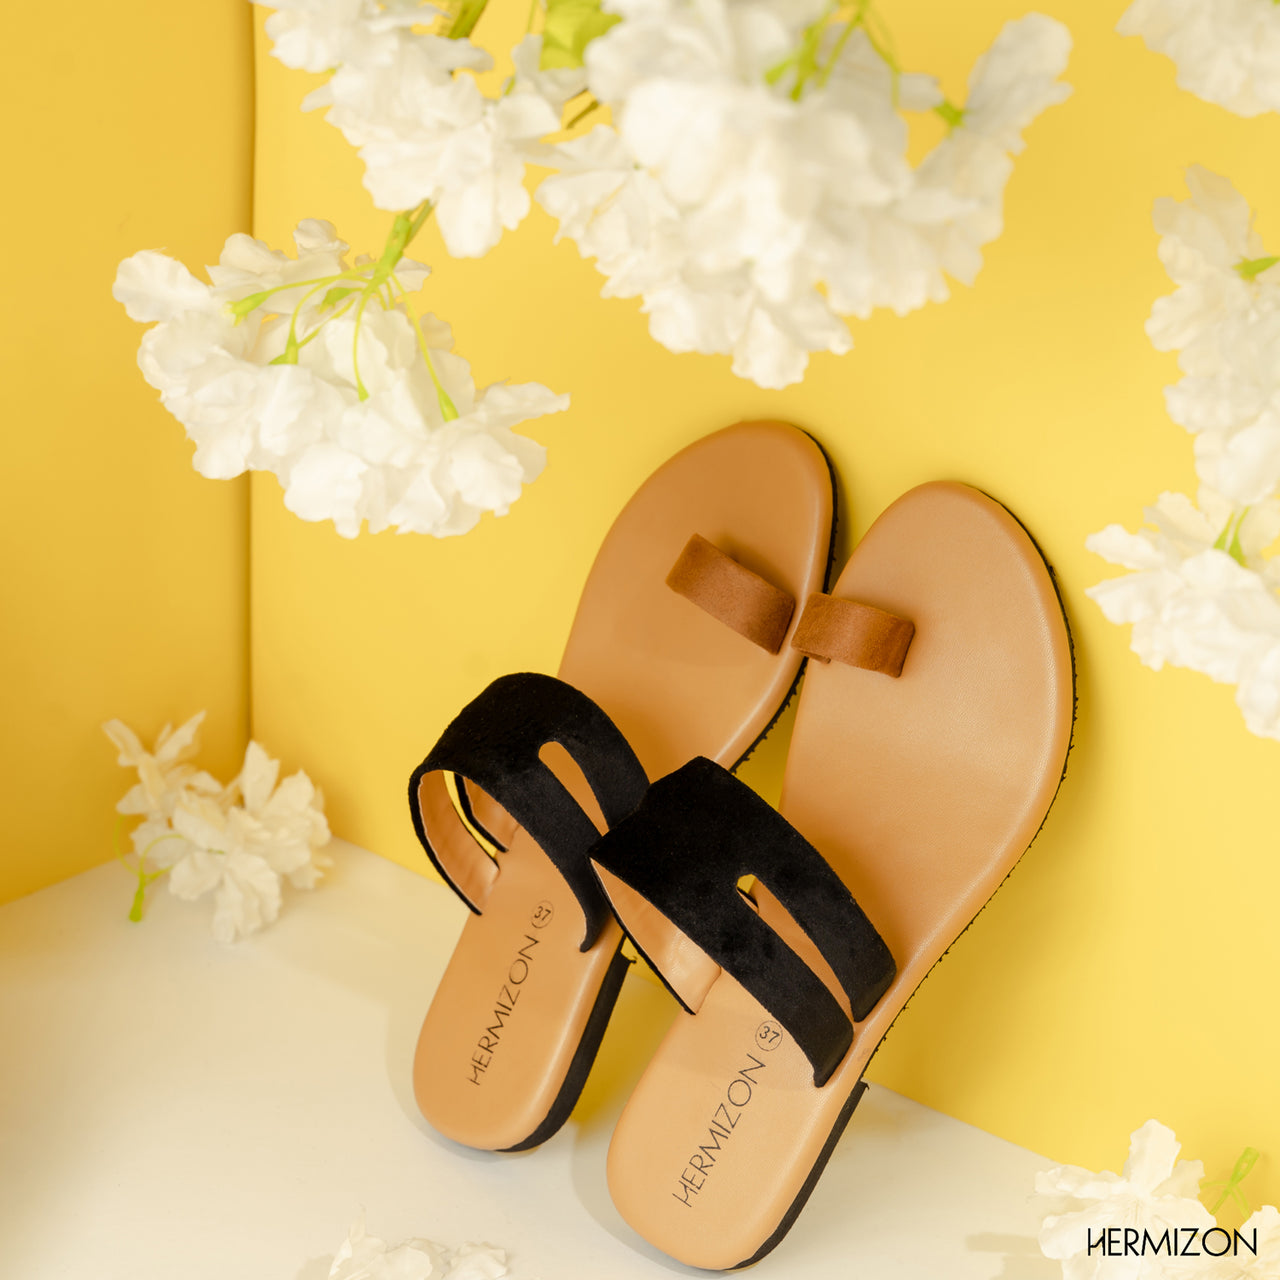 A pair of brown color flat sandals